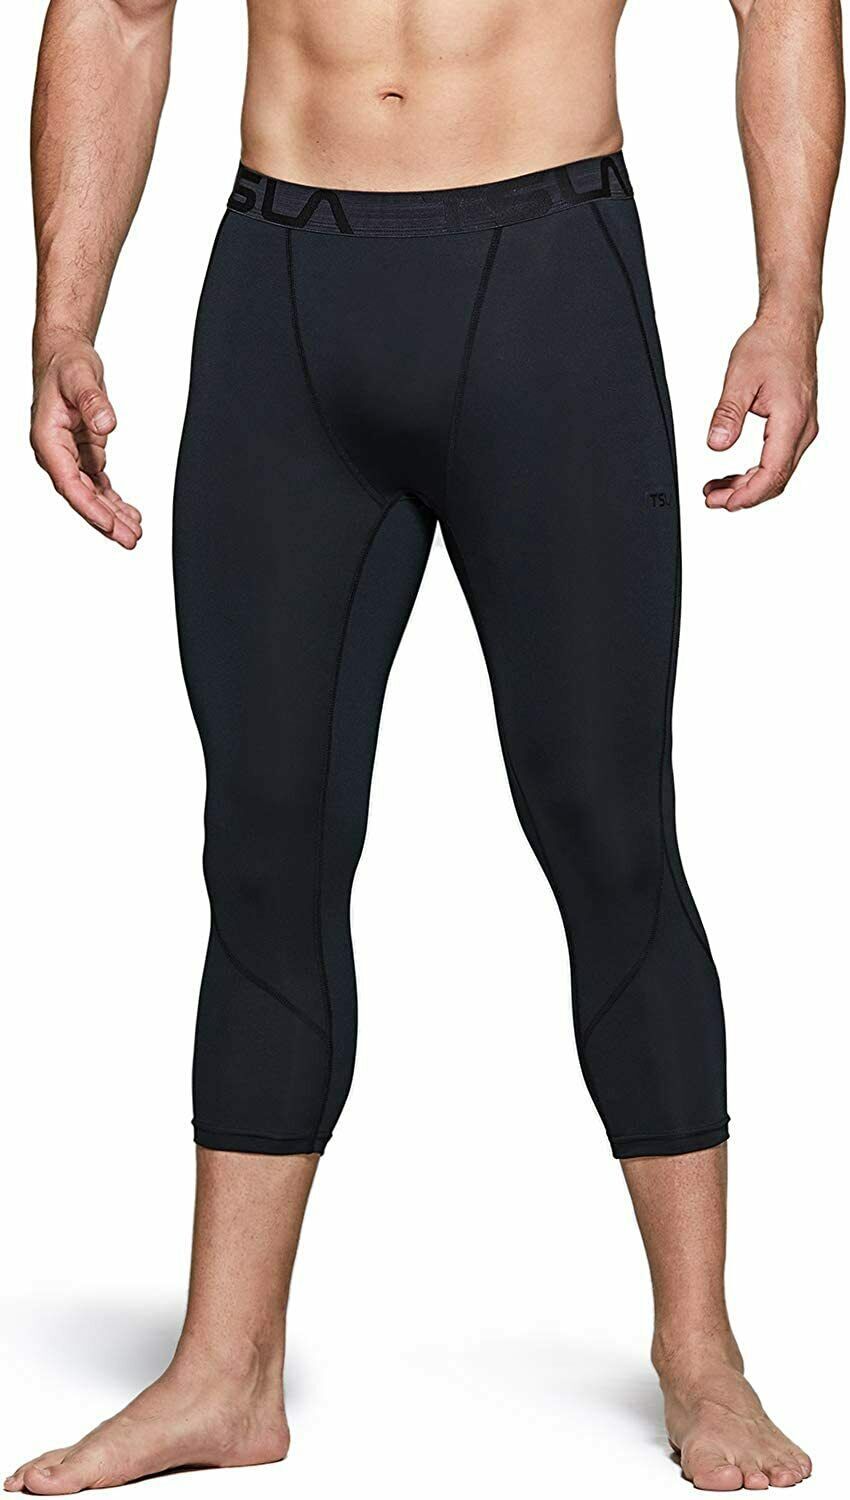 TSLA 1 or 2 Pack Men's 3/4 Compression Pants, Running Workout Tights ...